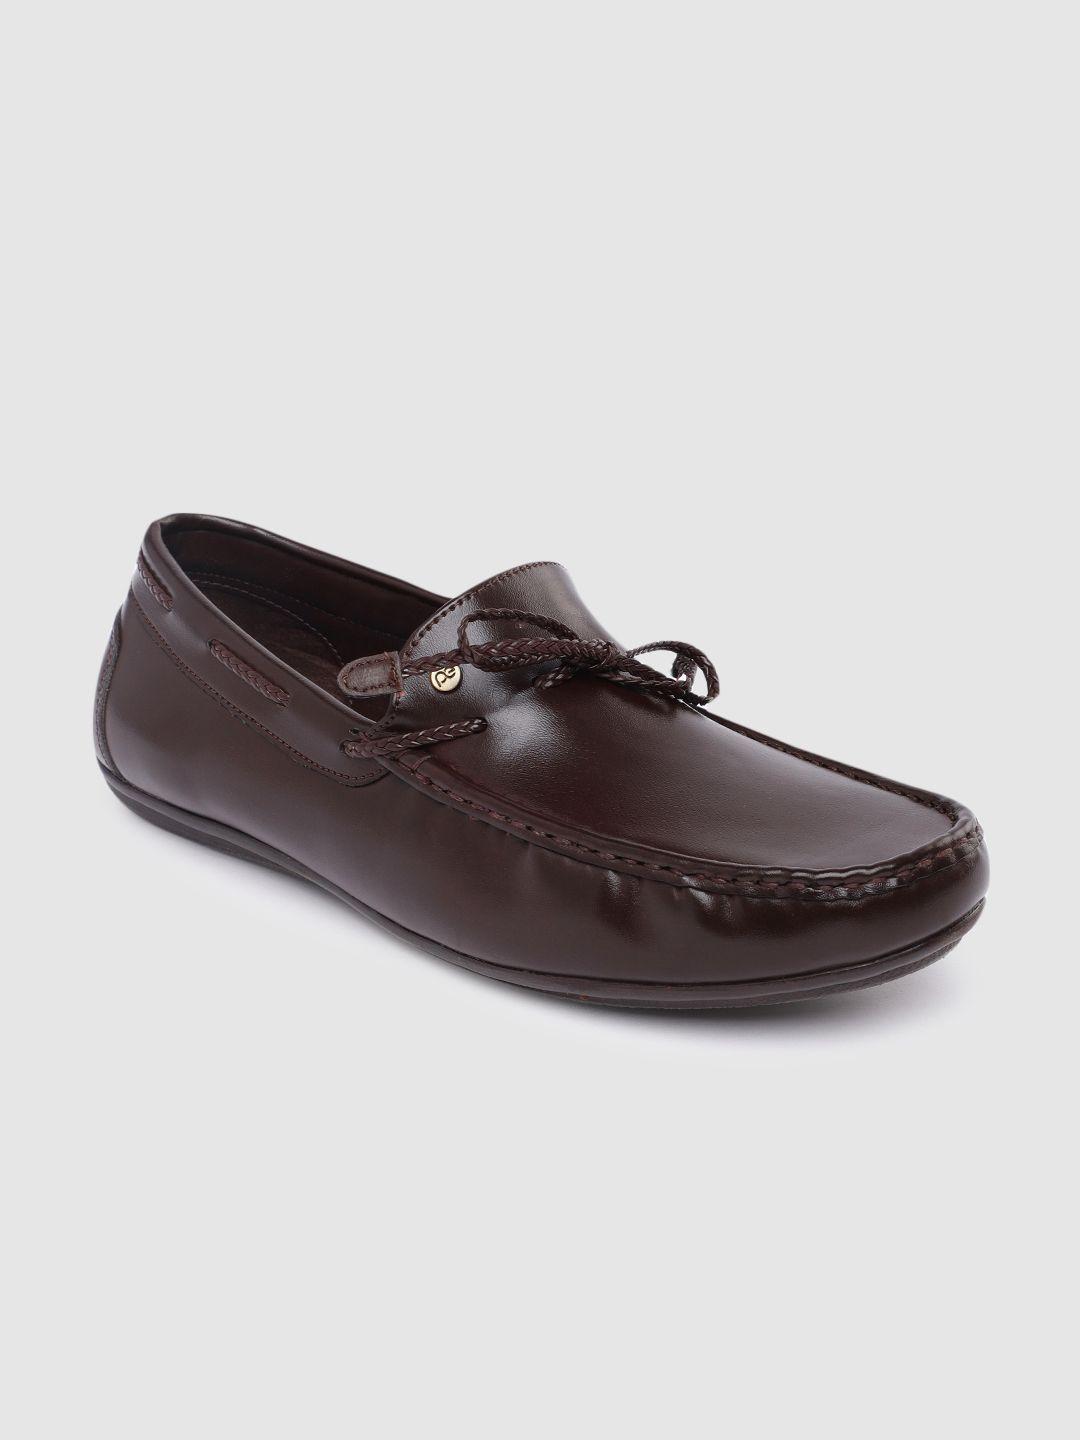 peter england men solid boat shoes